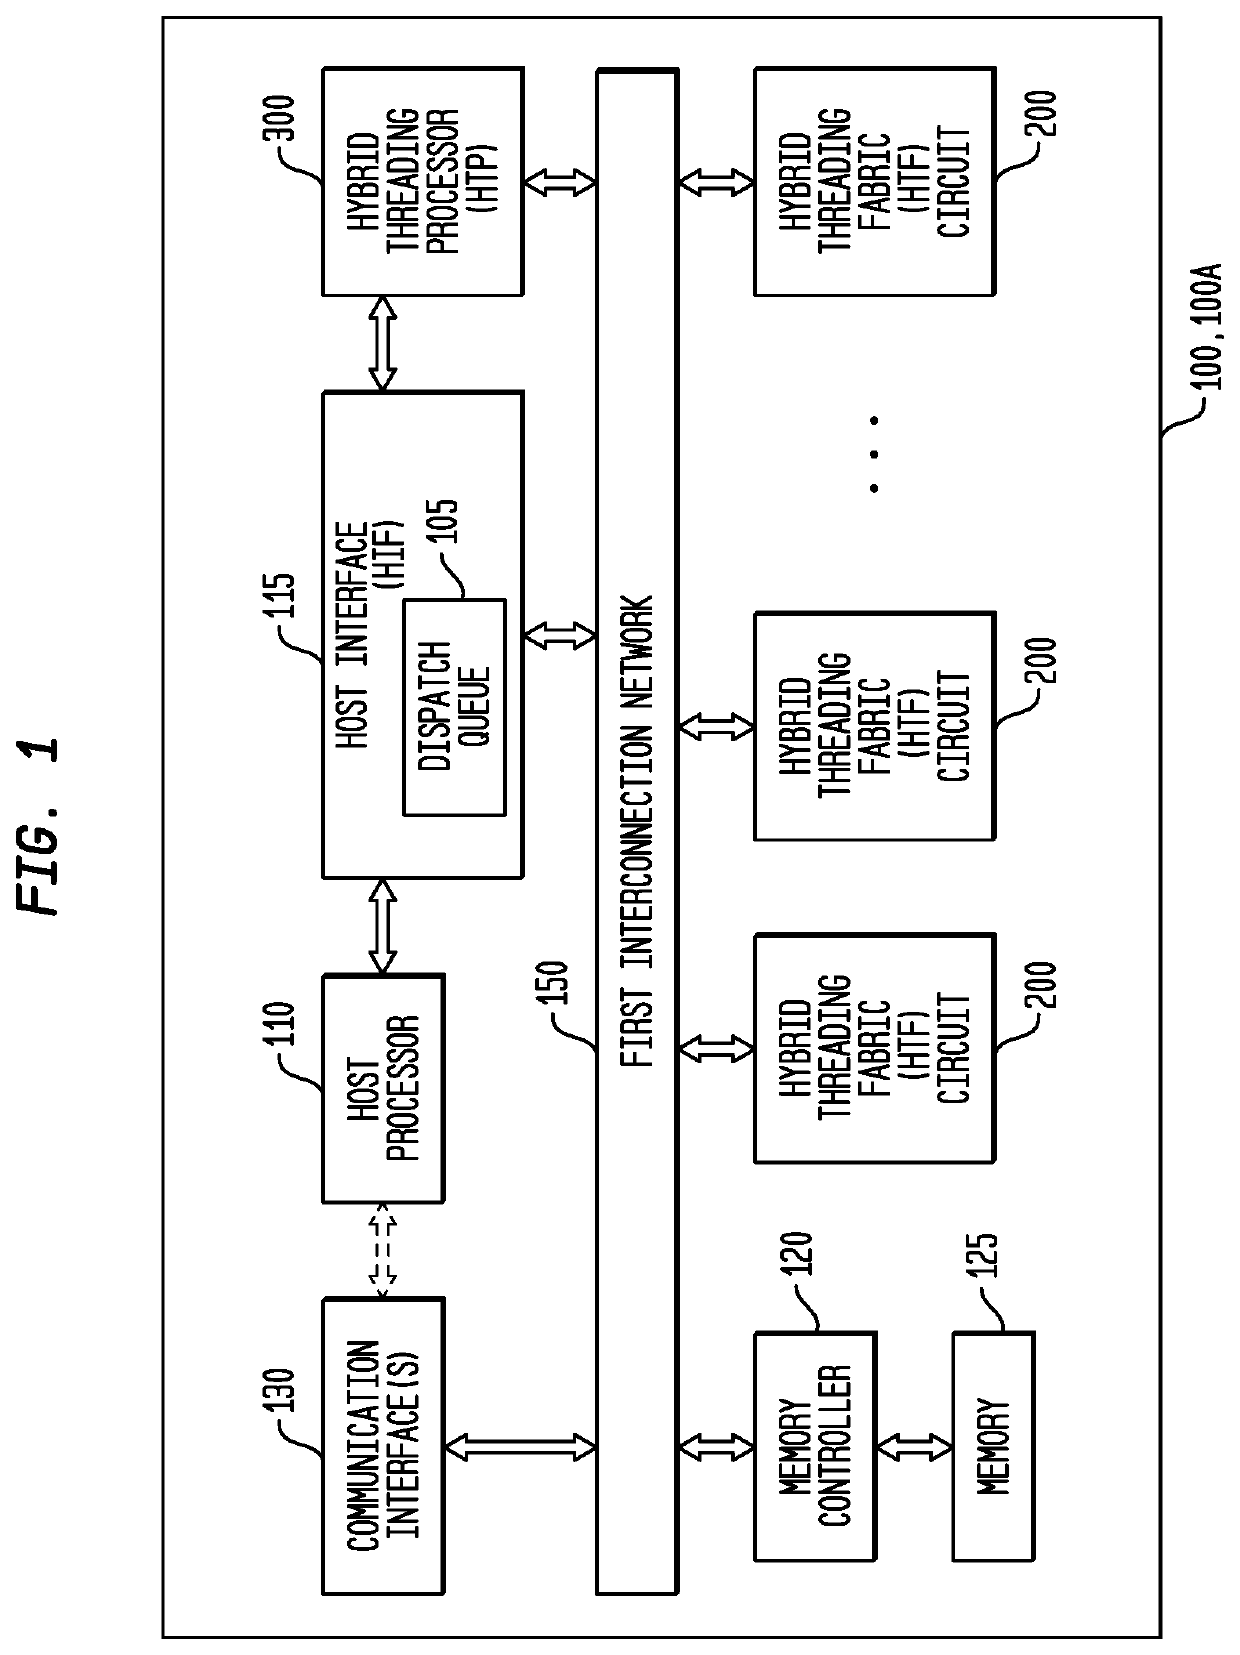 System Call Management in a User-Mode, Multi-Threaded, Self-Scheduling Processor